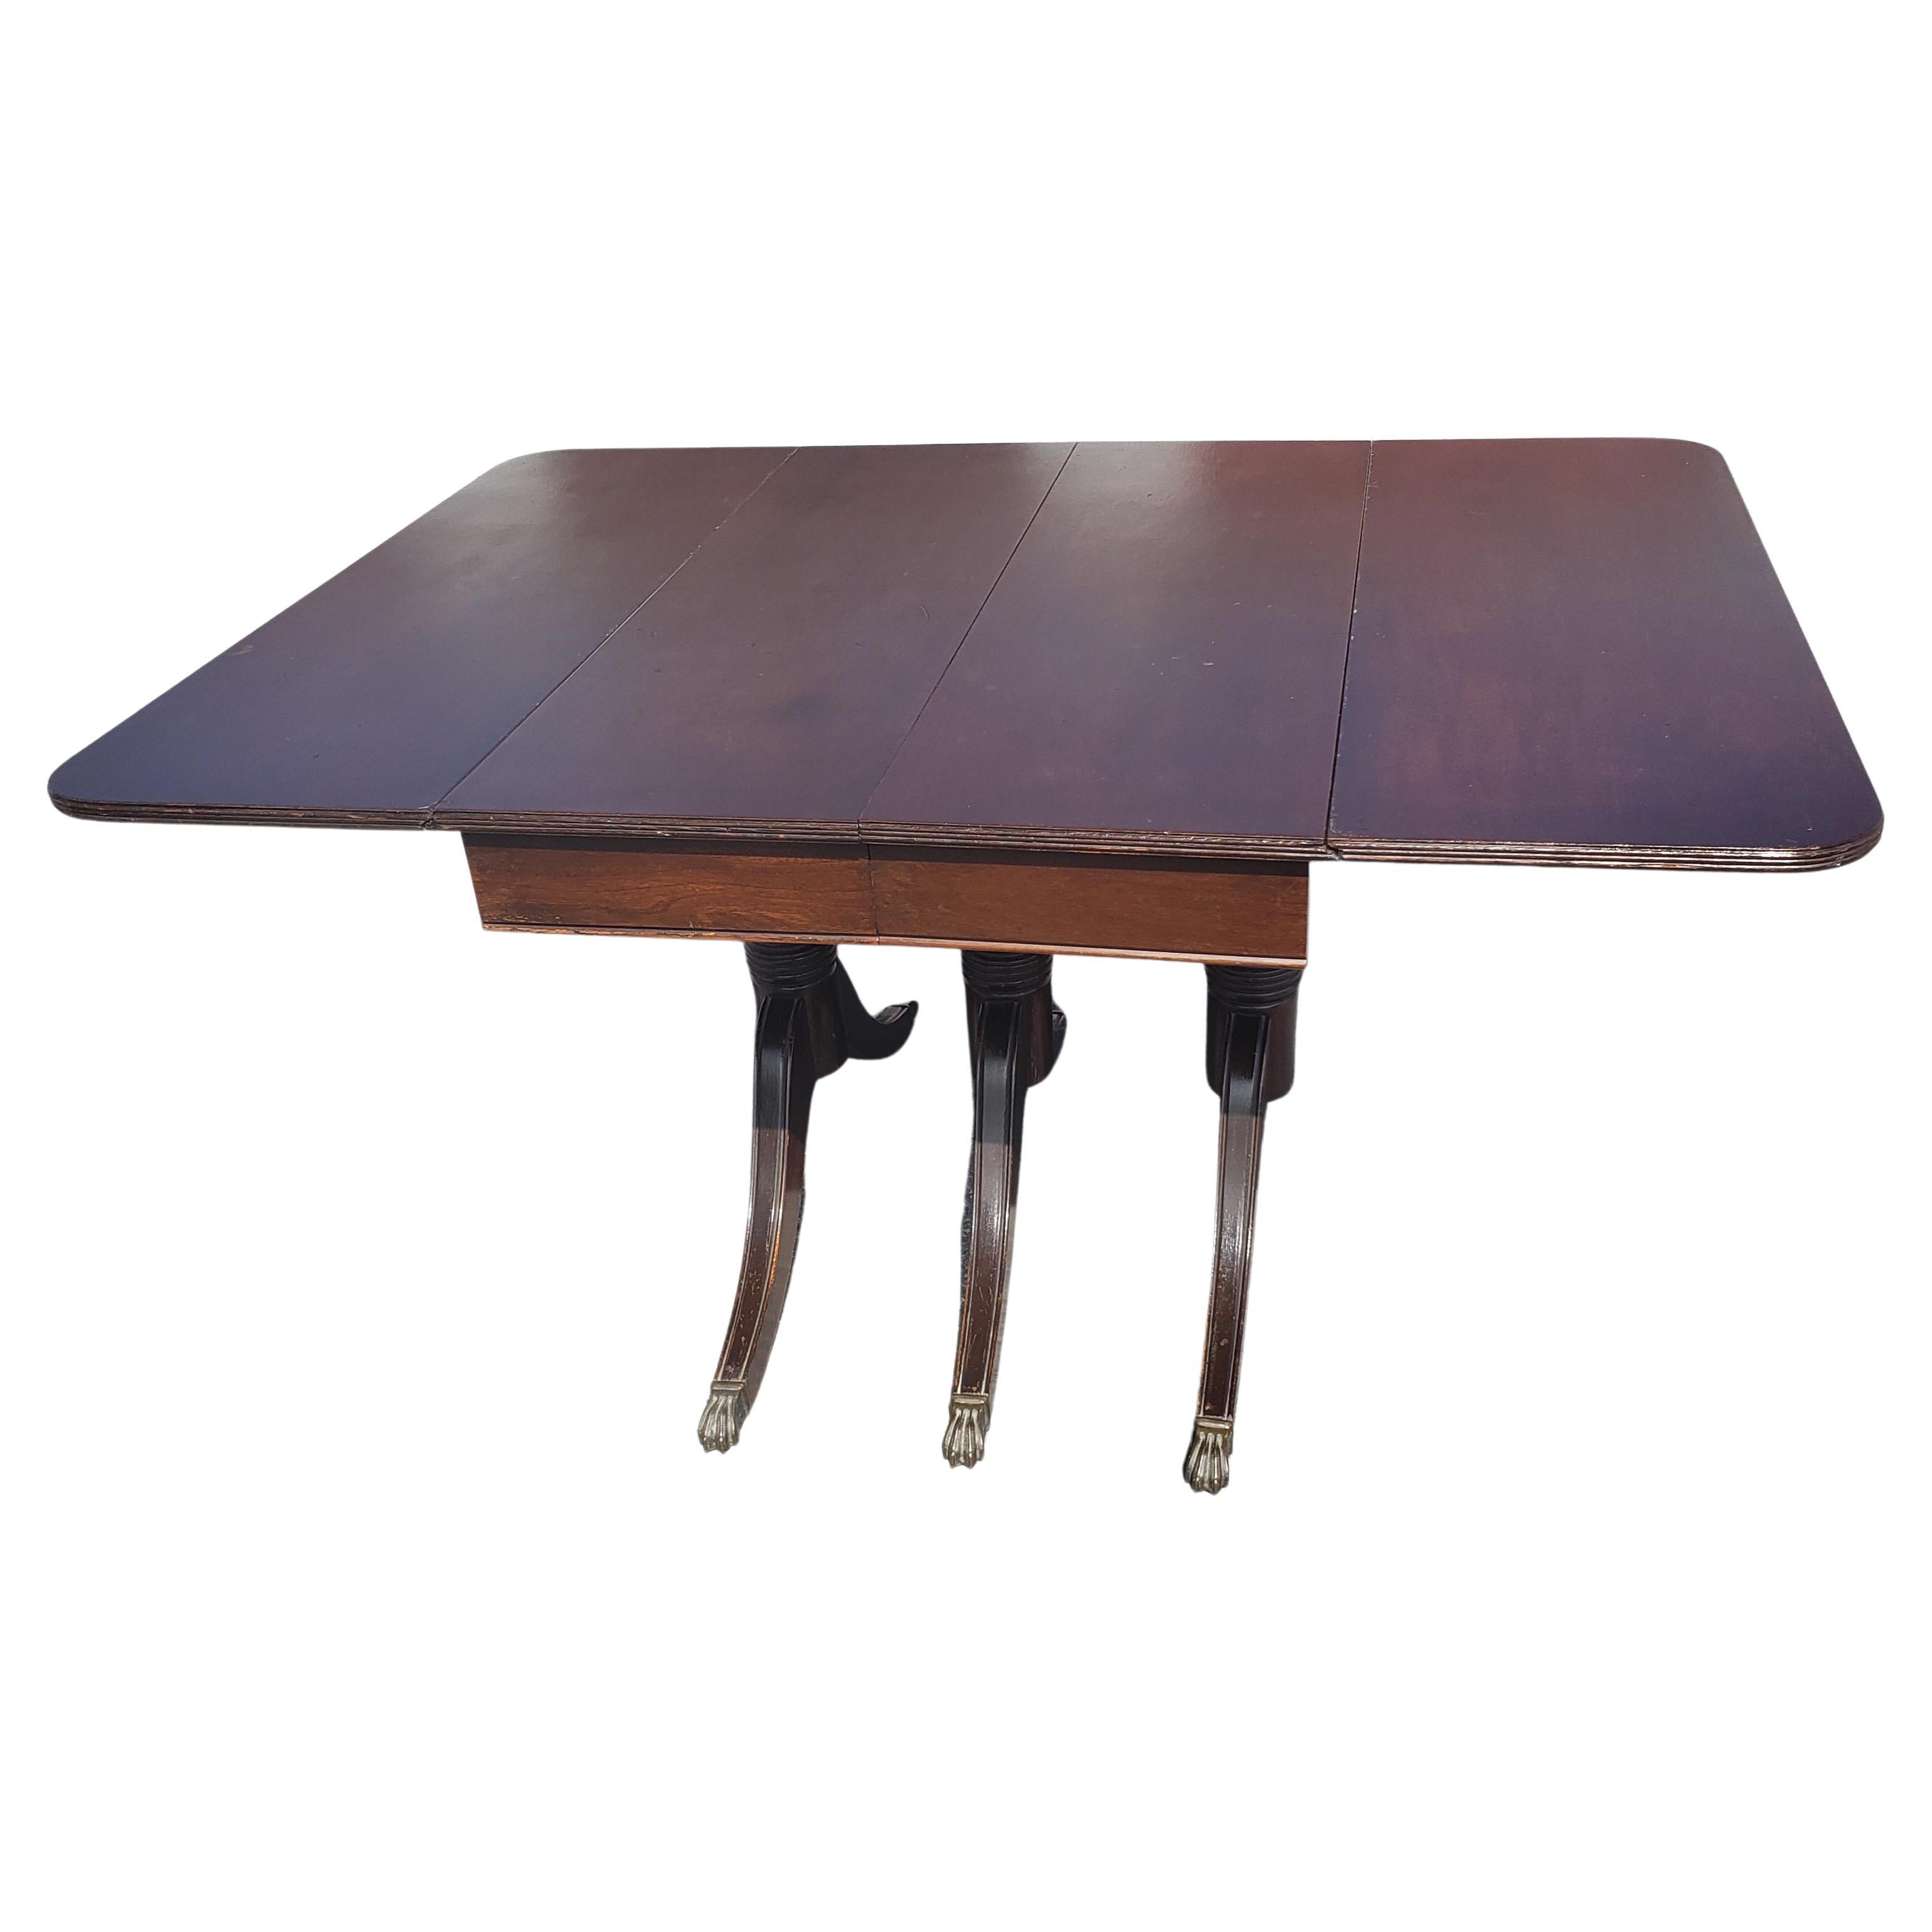 Very practical Vintage Federal Style Triple Pedestal Drop-Leaf Dining Table.
Triple pedestal terminating with antique brass lion paw feet. Original finish with age patina.
Wear appropriate with age and use

WJAB040522.